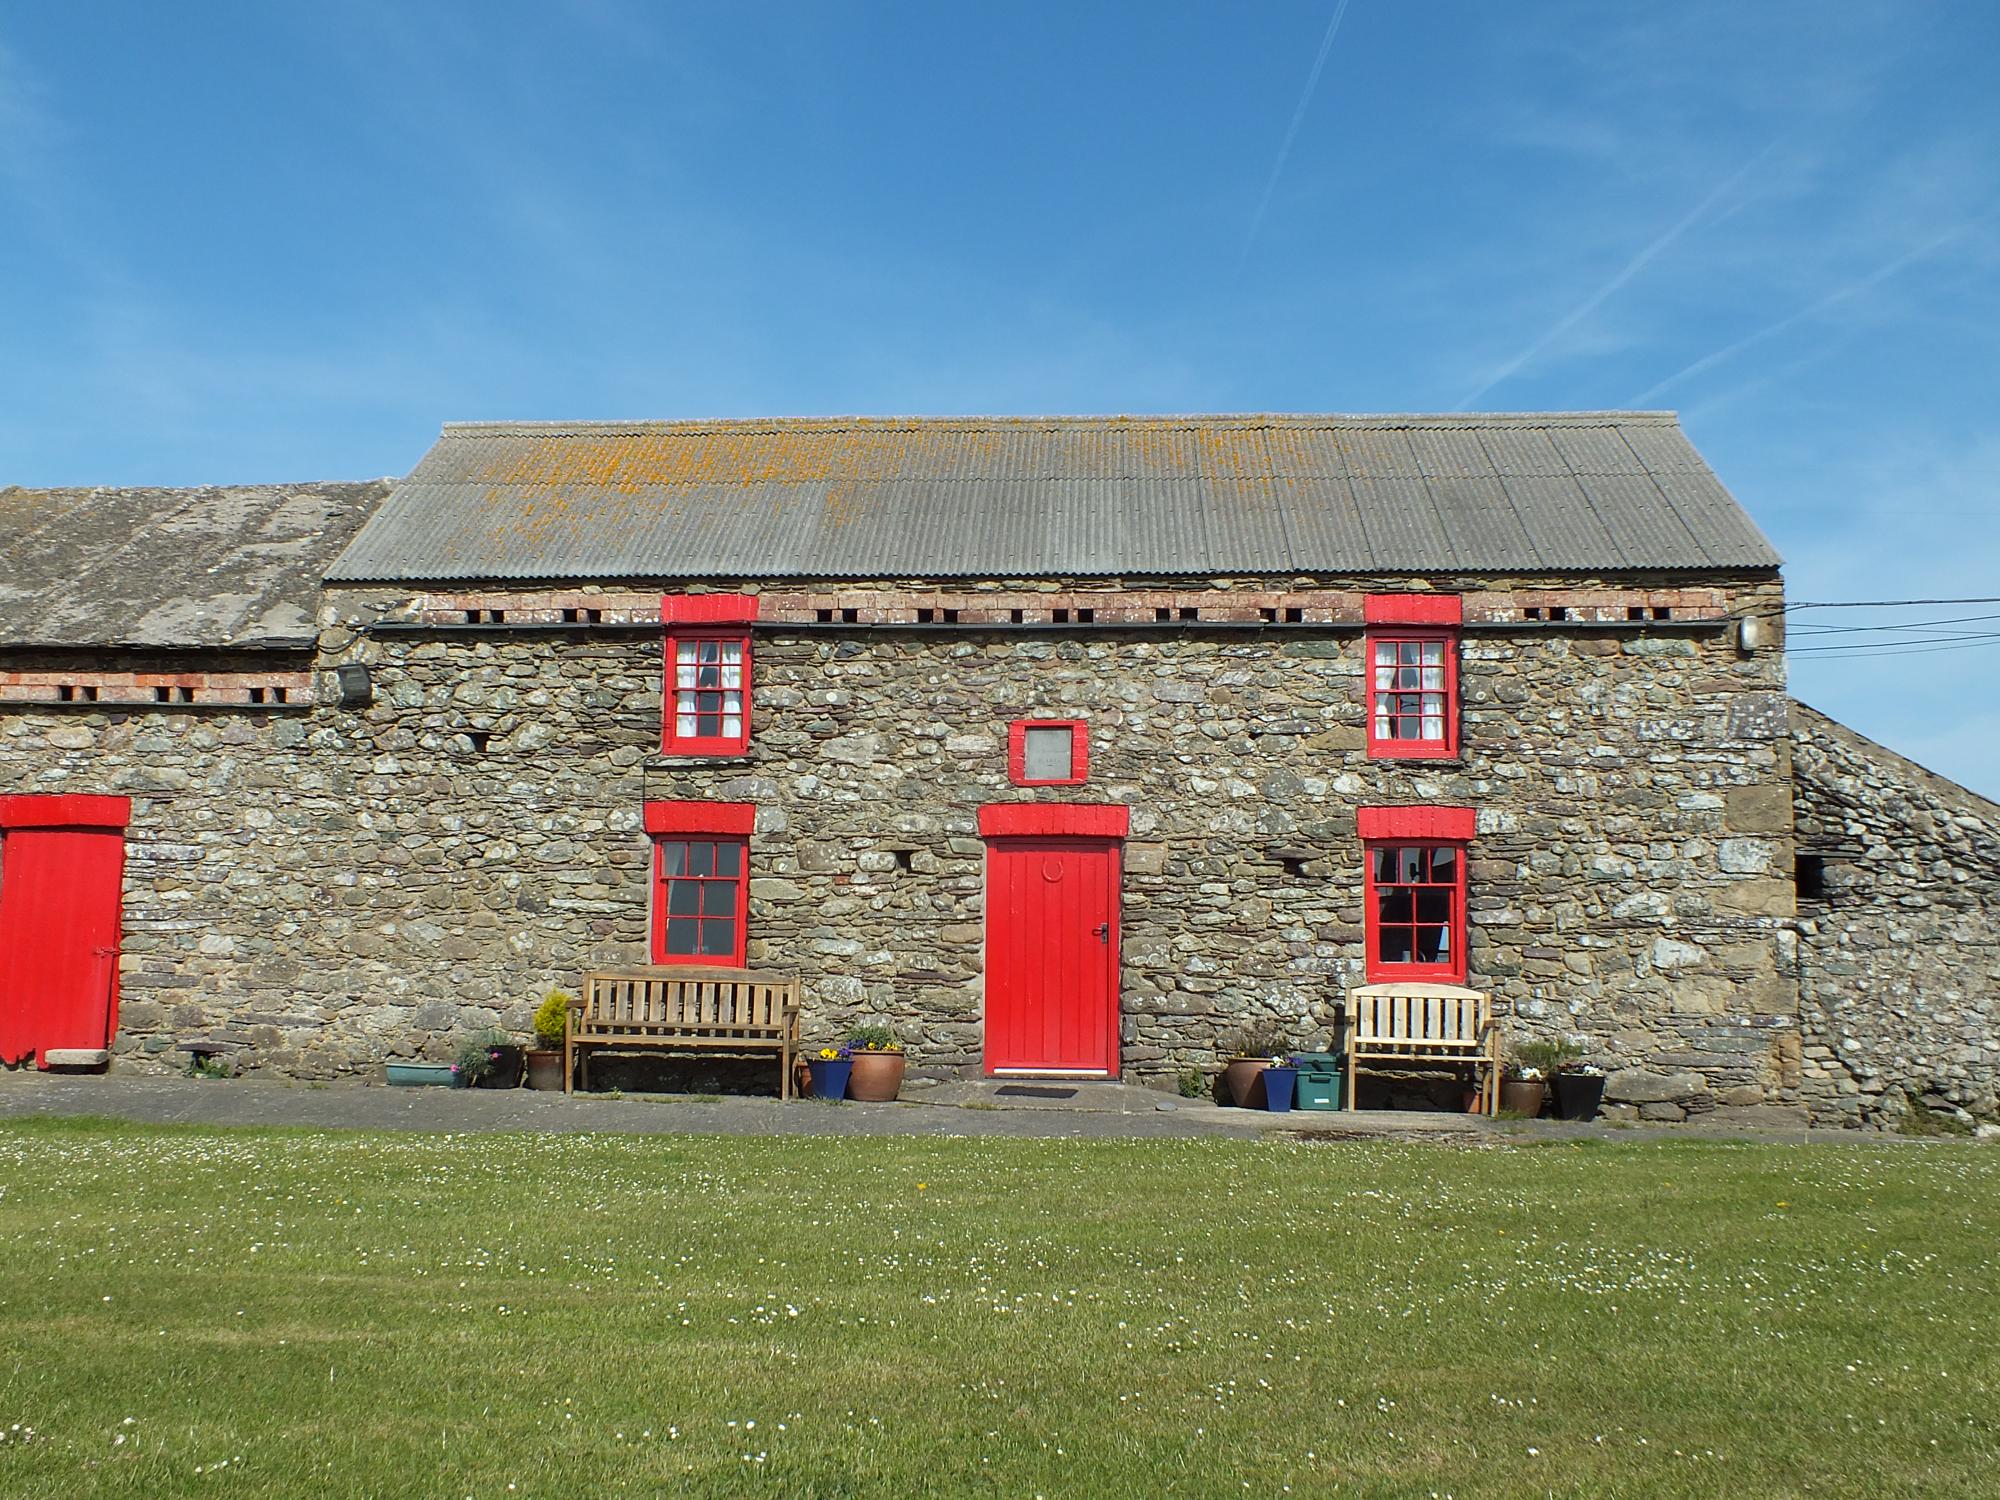 Self-Catering in Pembrokeshire holidays at Cool Places